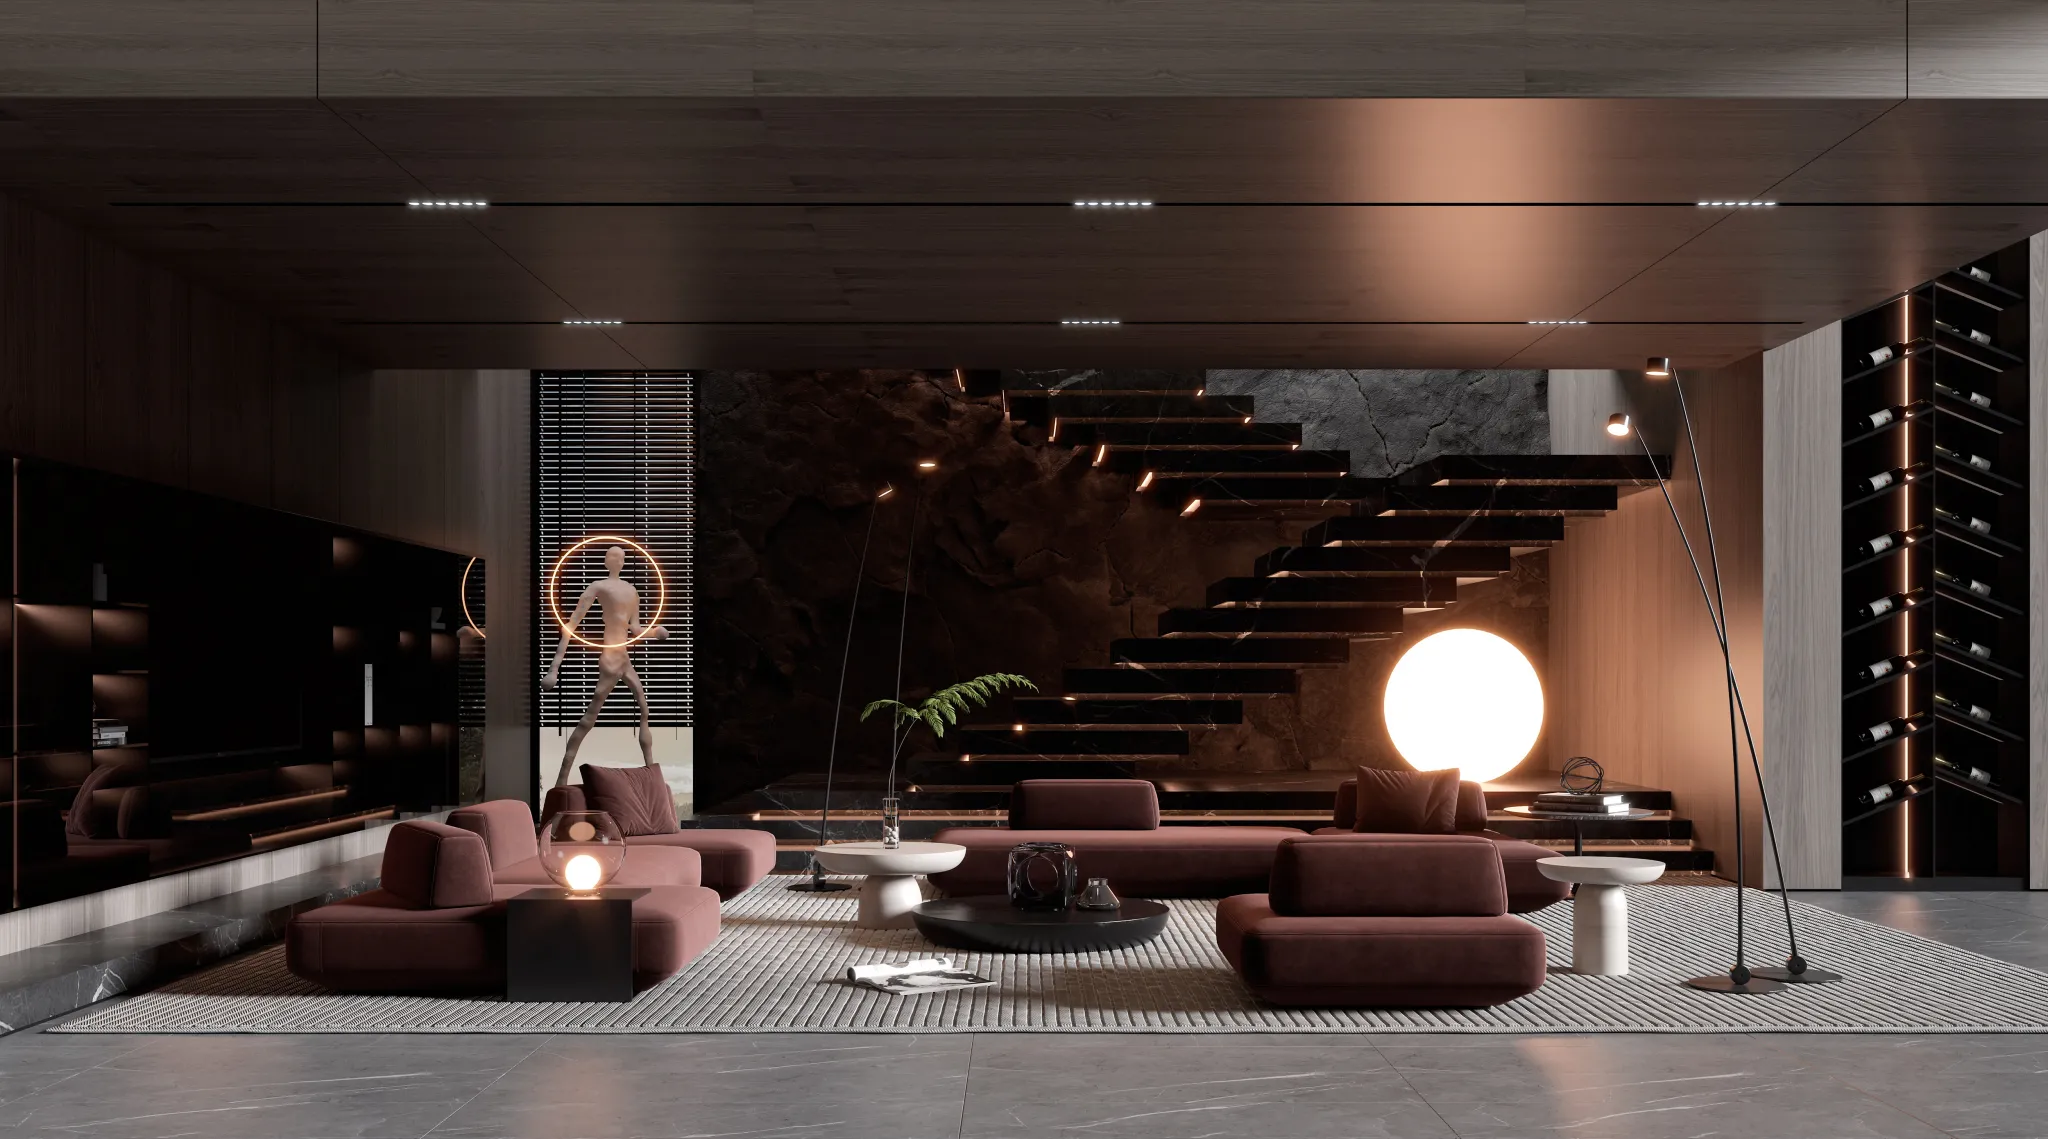 HOUSE SPACE 3D SCENES – LIVING ROOM – 0118